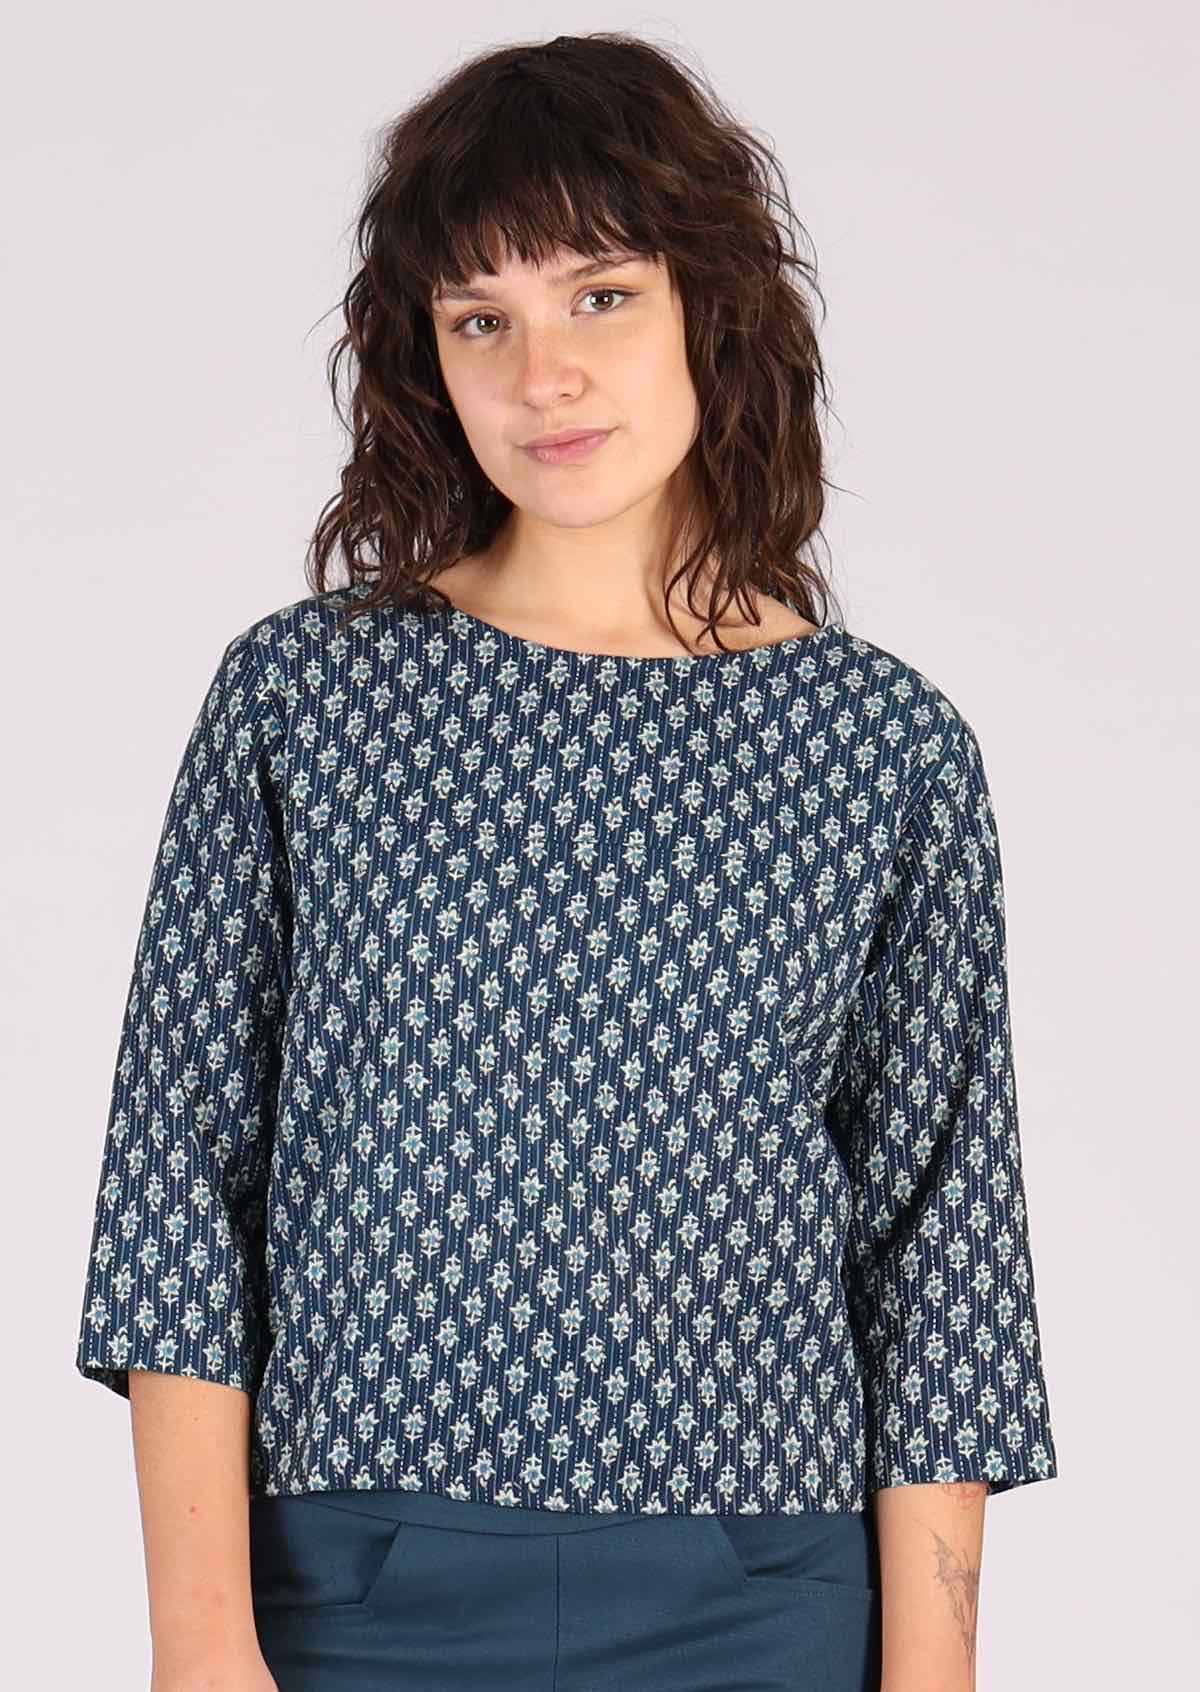 100% cotton top has 3/4 length sleeves. 